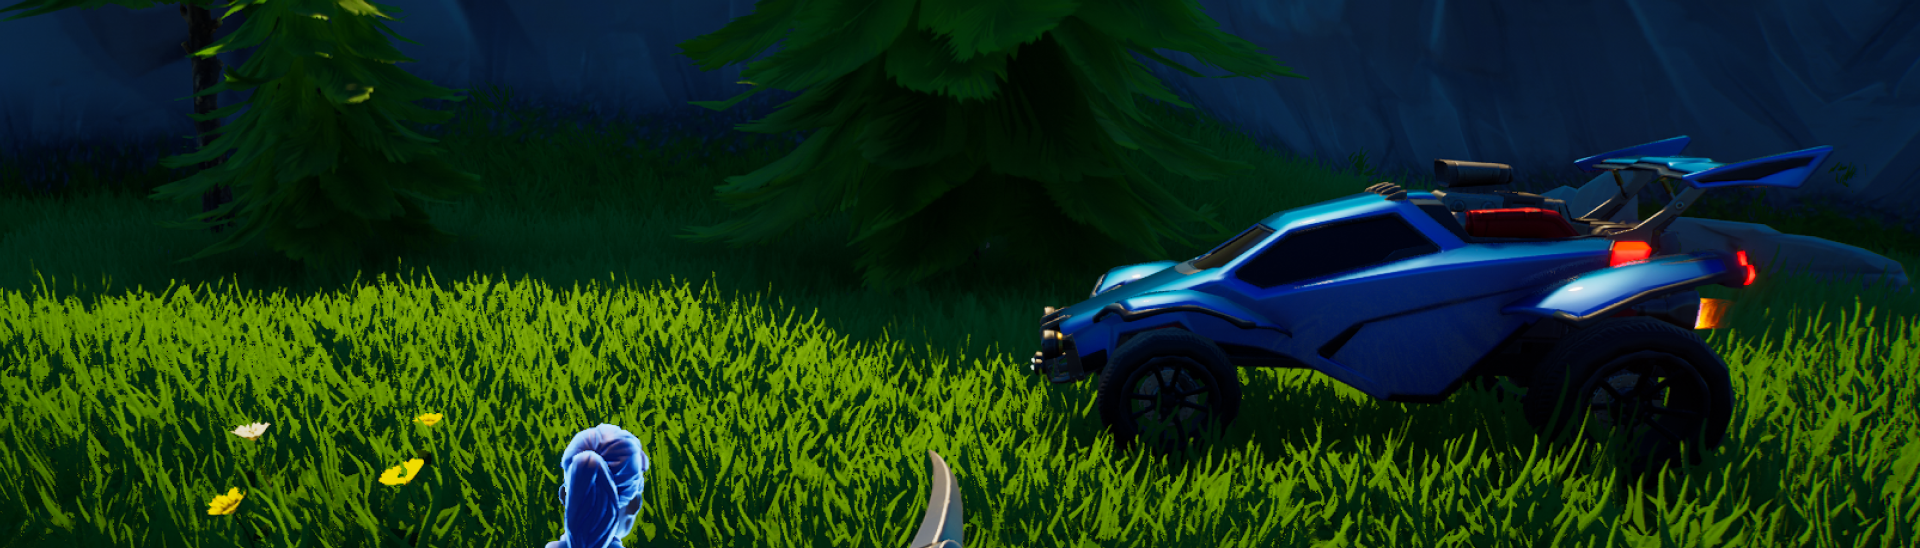 Rocket League's Octane coming to Fortnite in v22.10